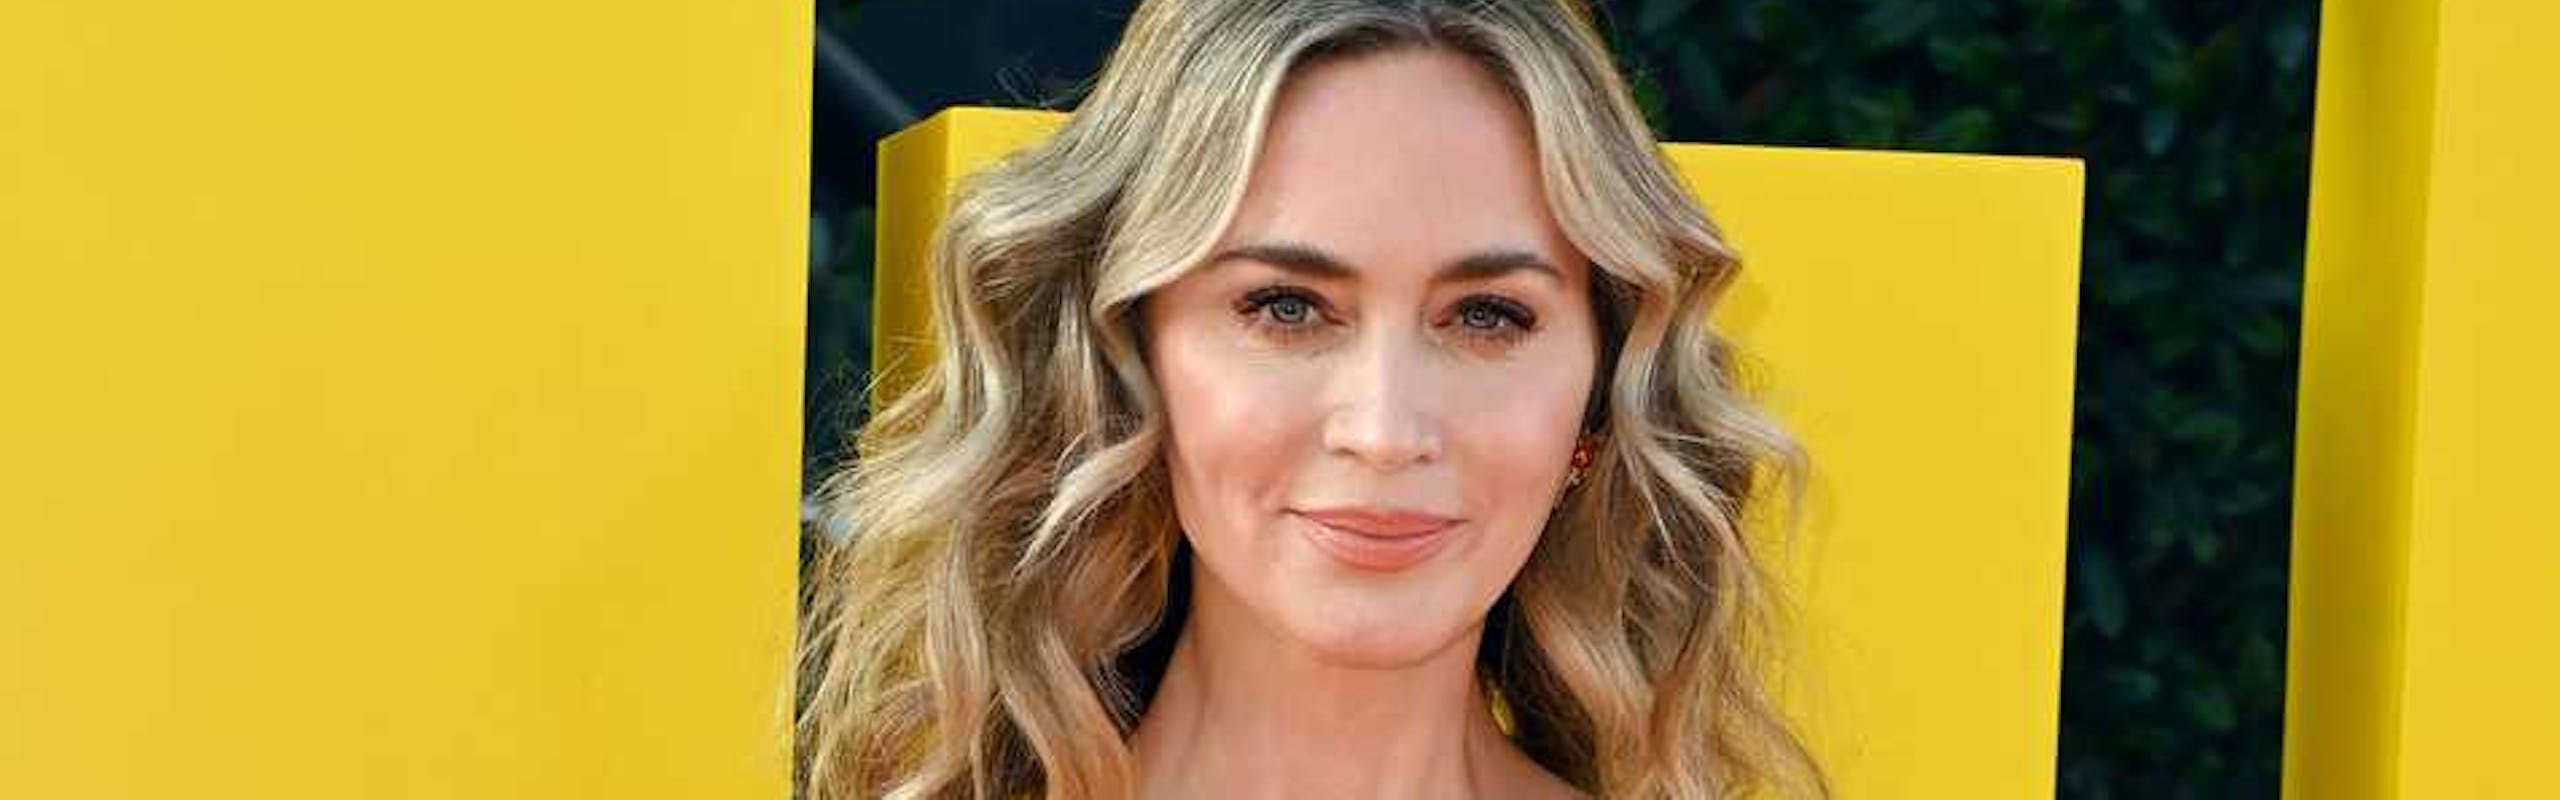 Emily Blunt - Foto: Getty Images